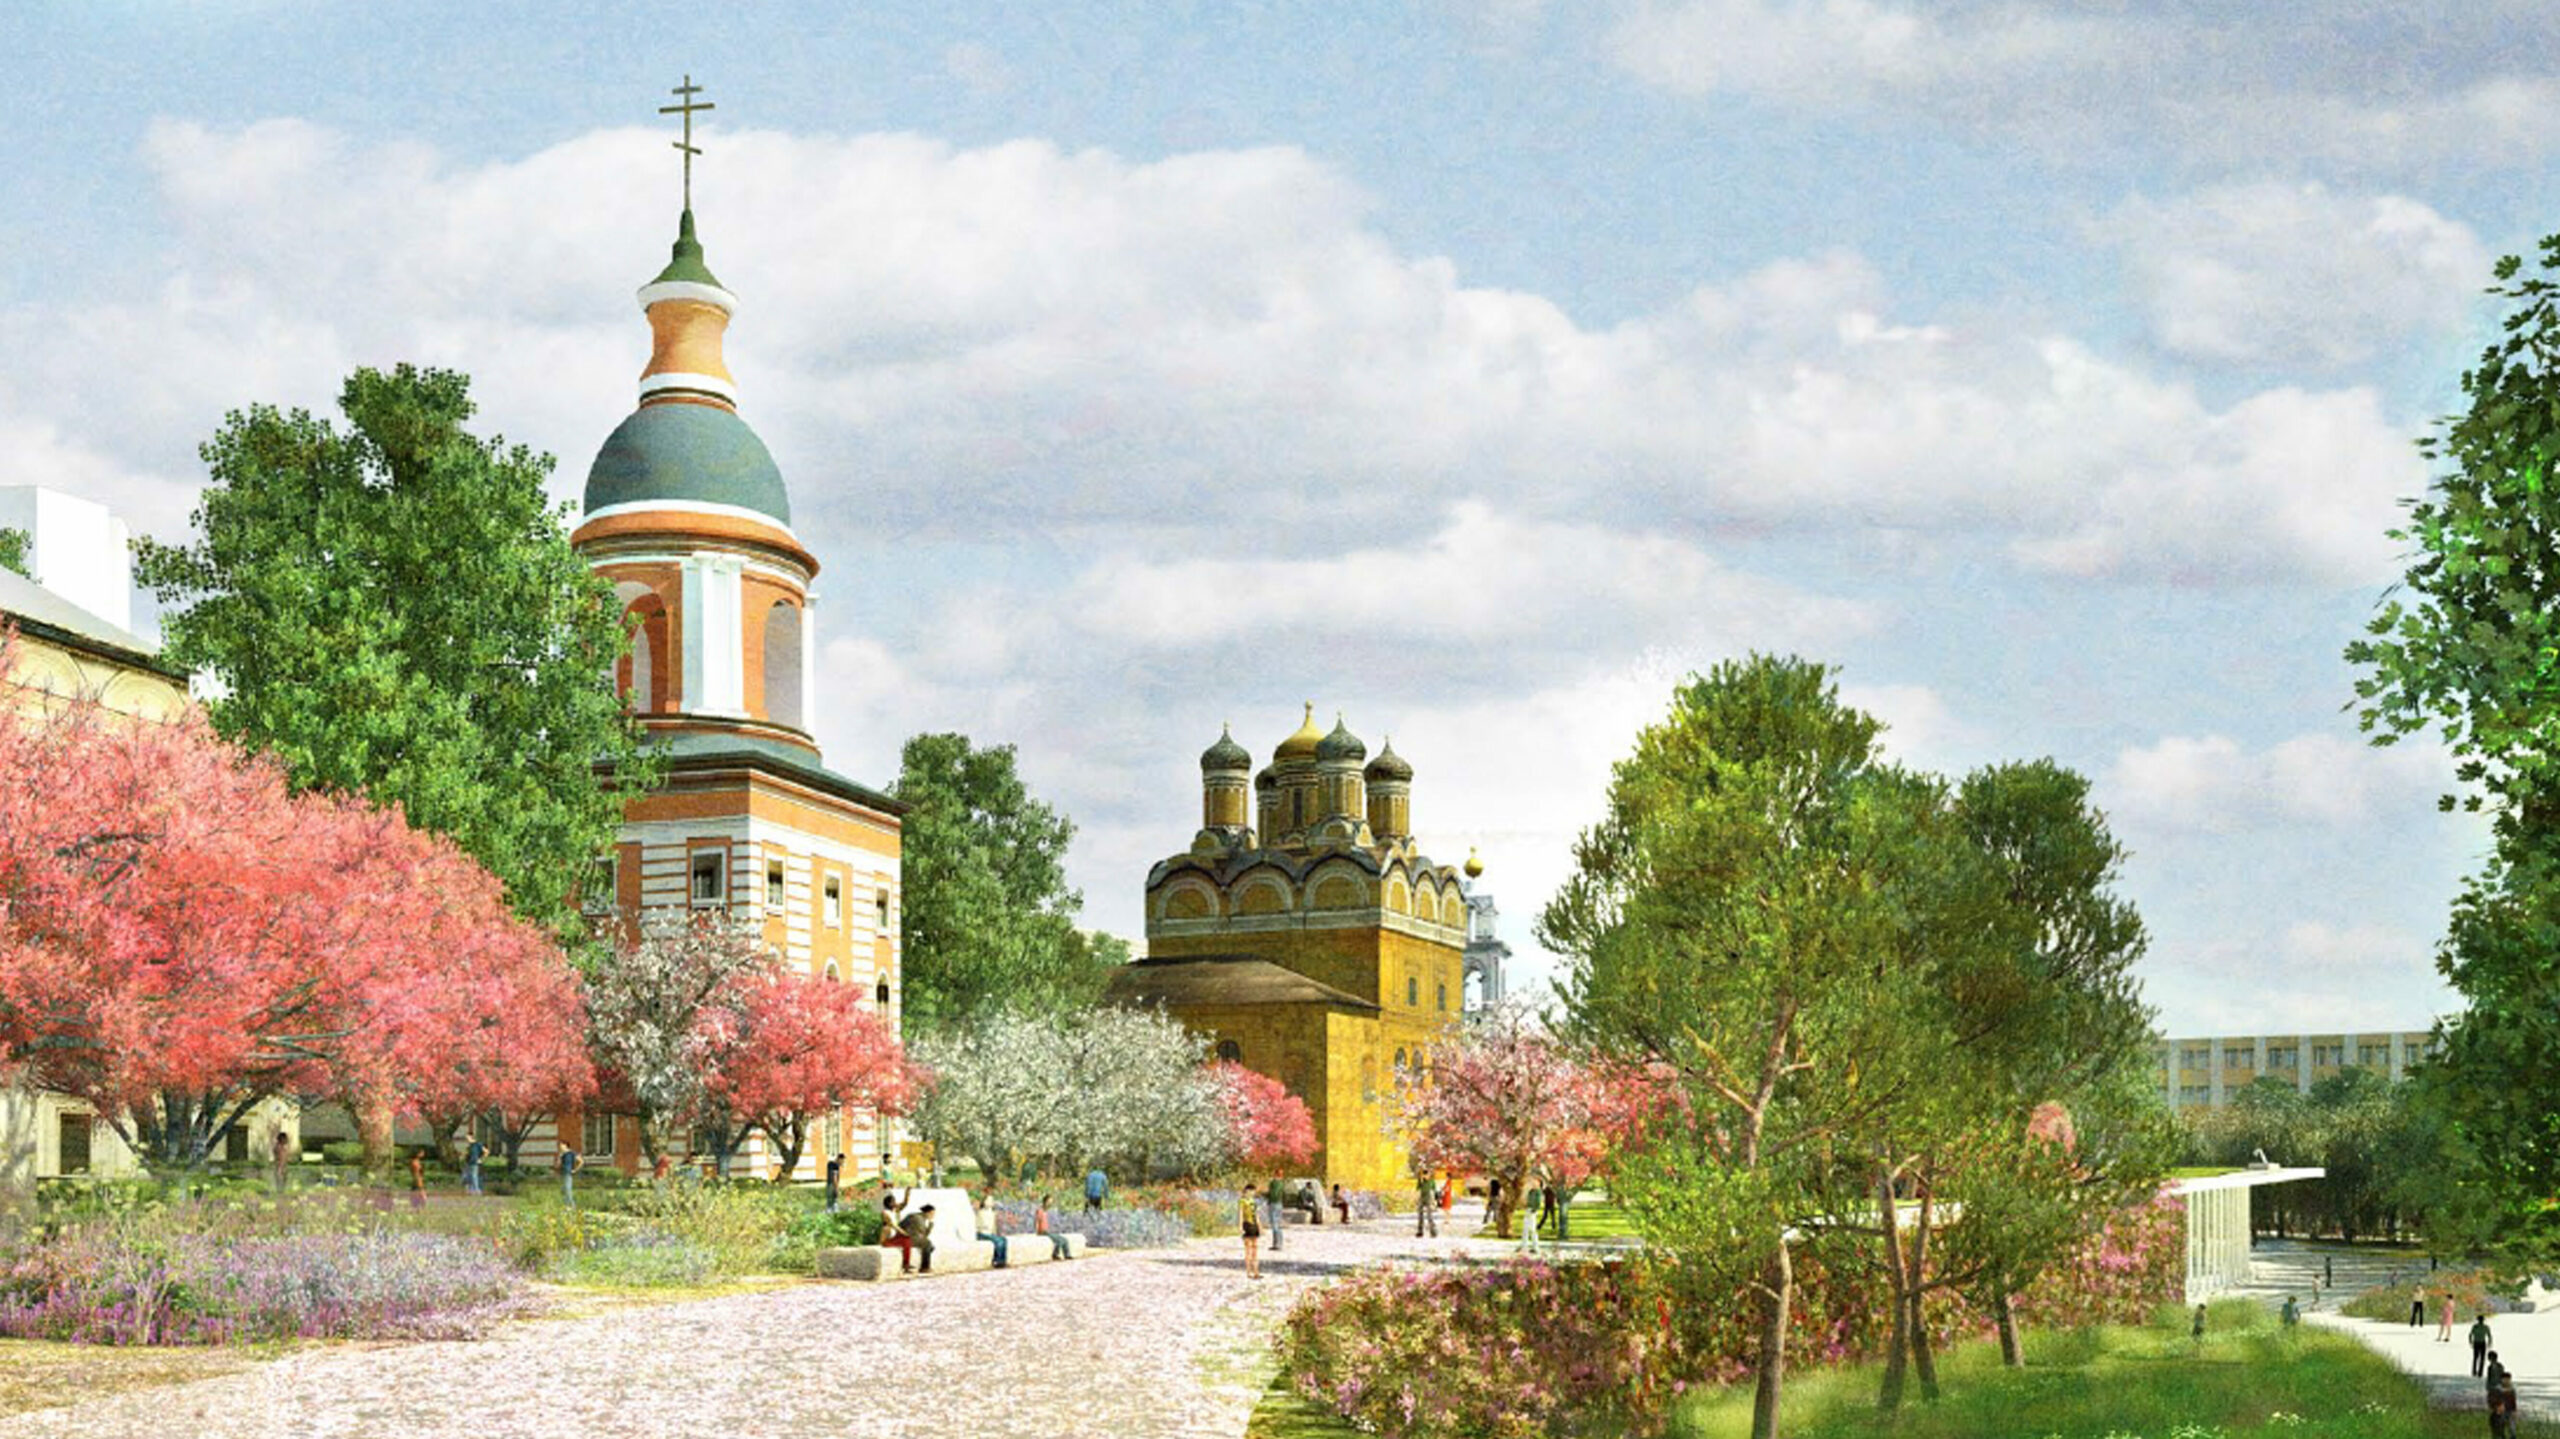 Moscow goes for green with the extensive new Zaryadye Park